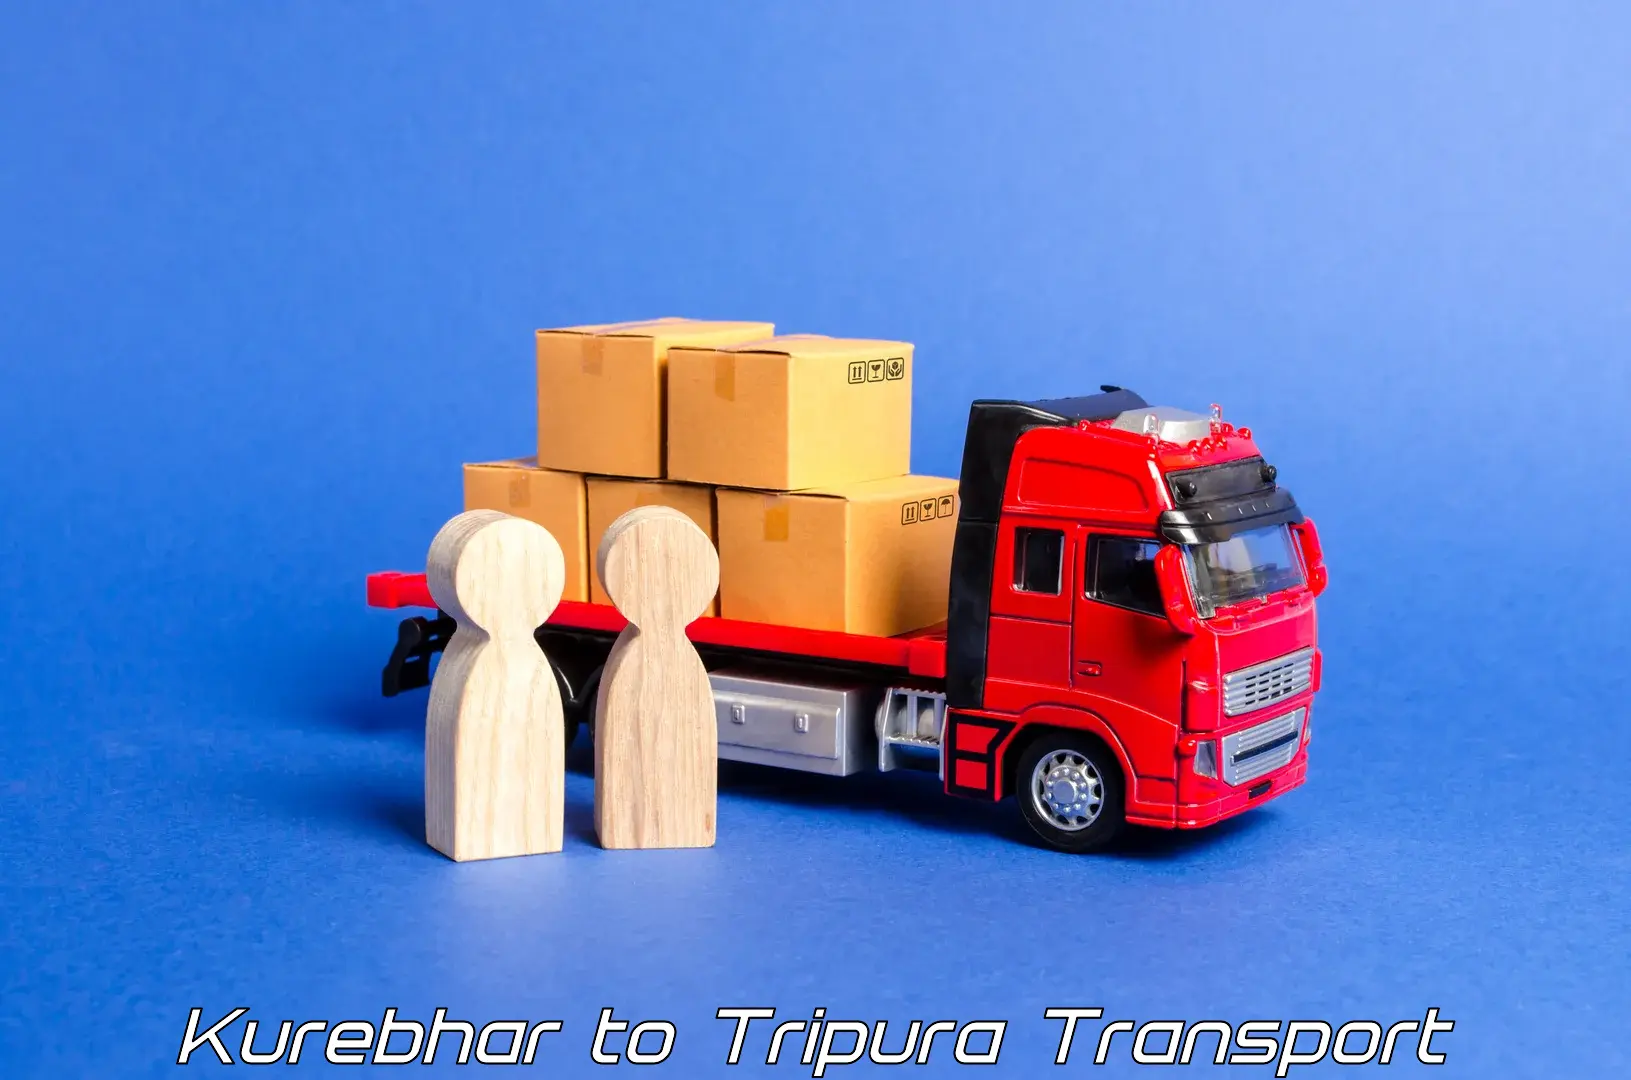 Delivery service in Kurebhar to Udaipur Tripura